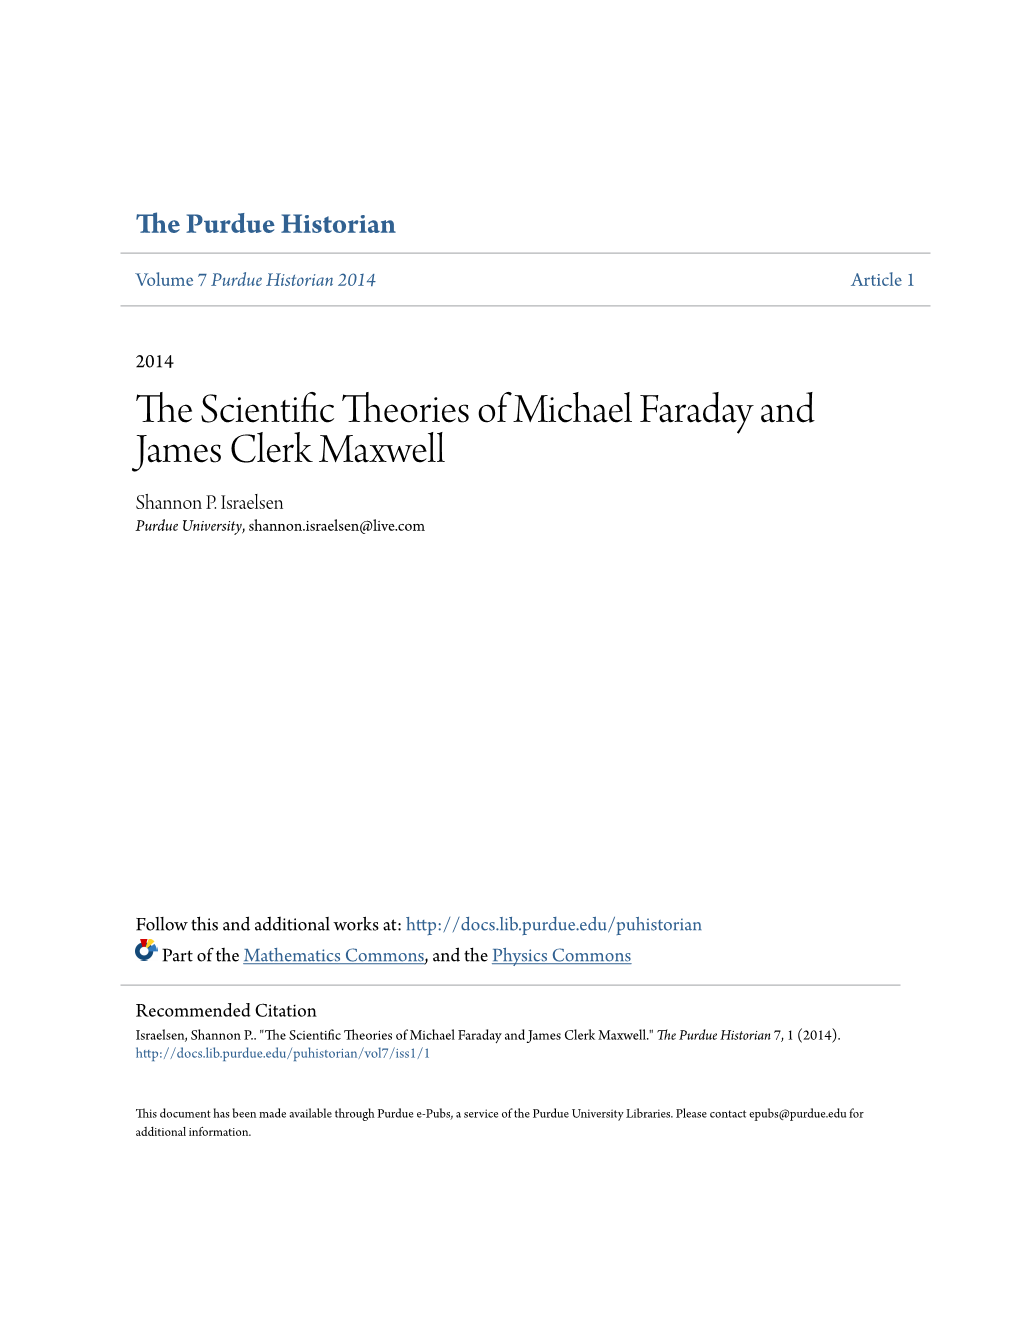 The Scientific Theories of Michael Faraday and James Clerk Maxwell